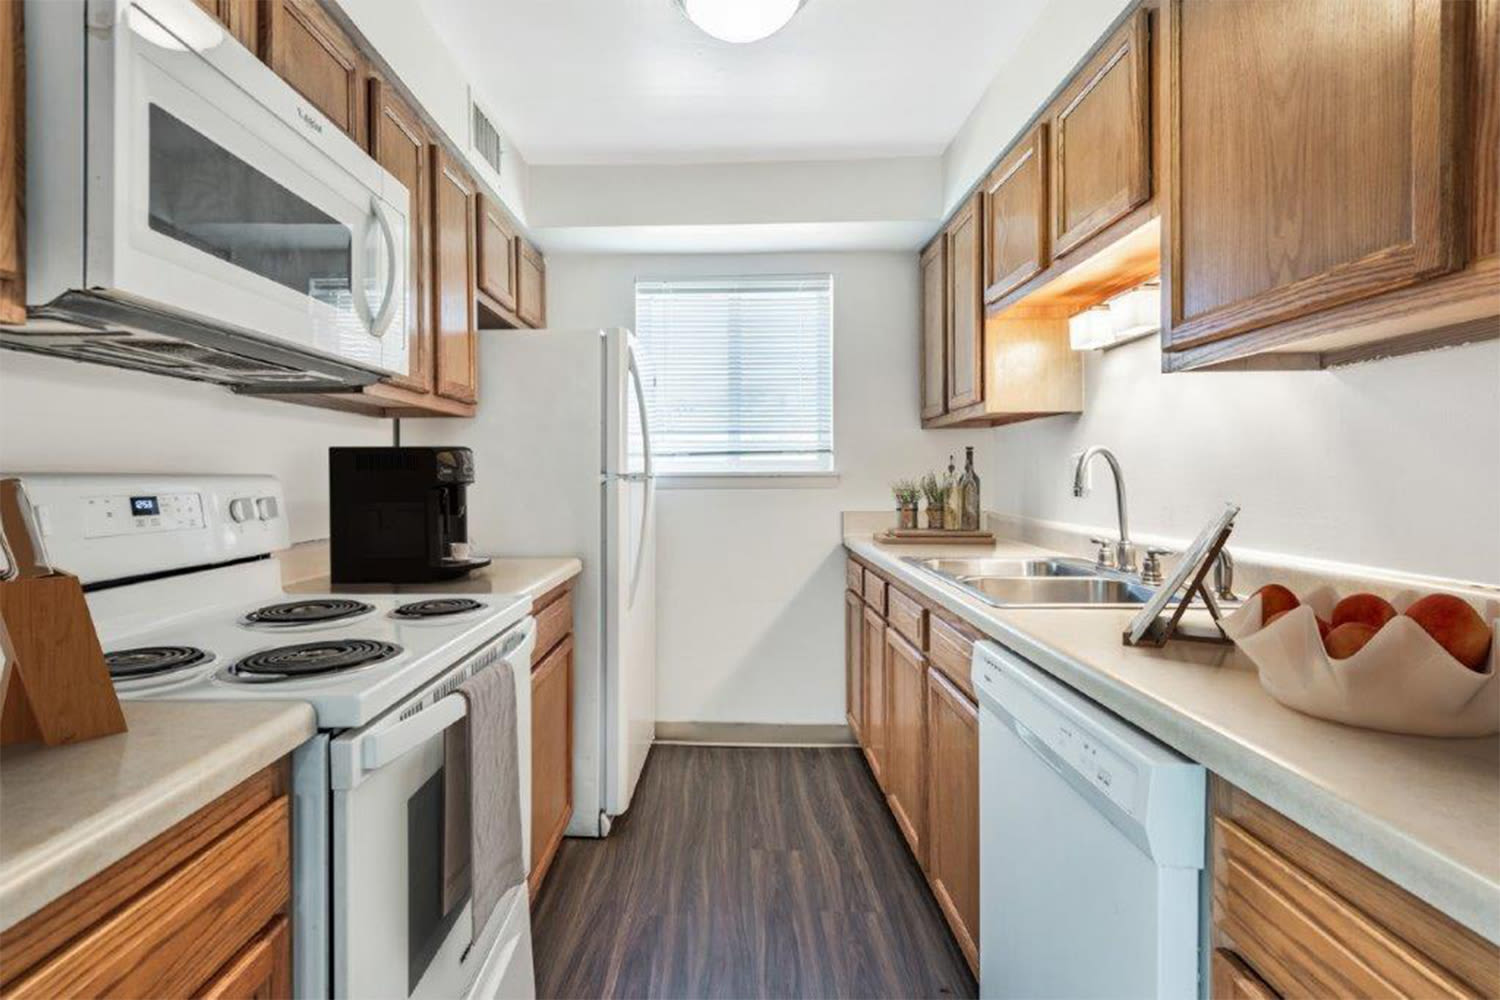 Fully equipped kitchen with sleek black appliances at Crossroads Apartments & Townhomes in Spencerport, New York